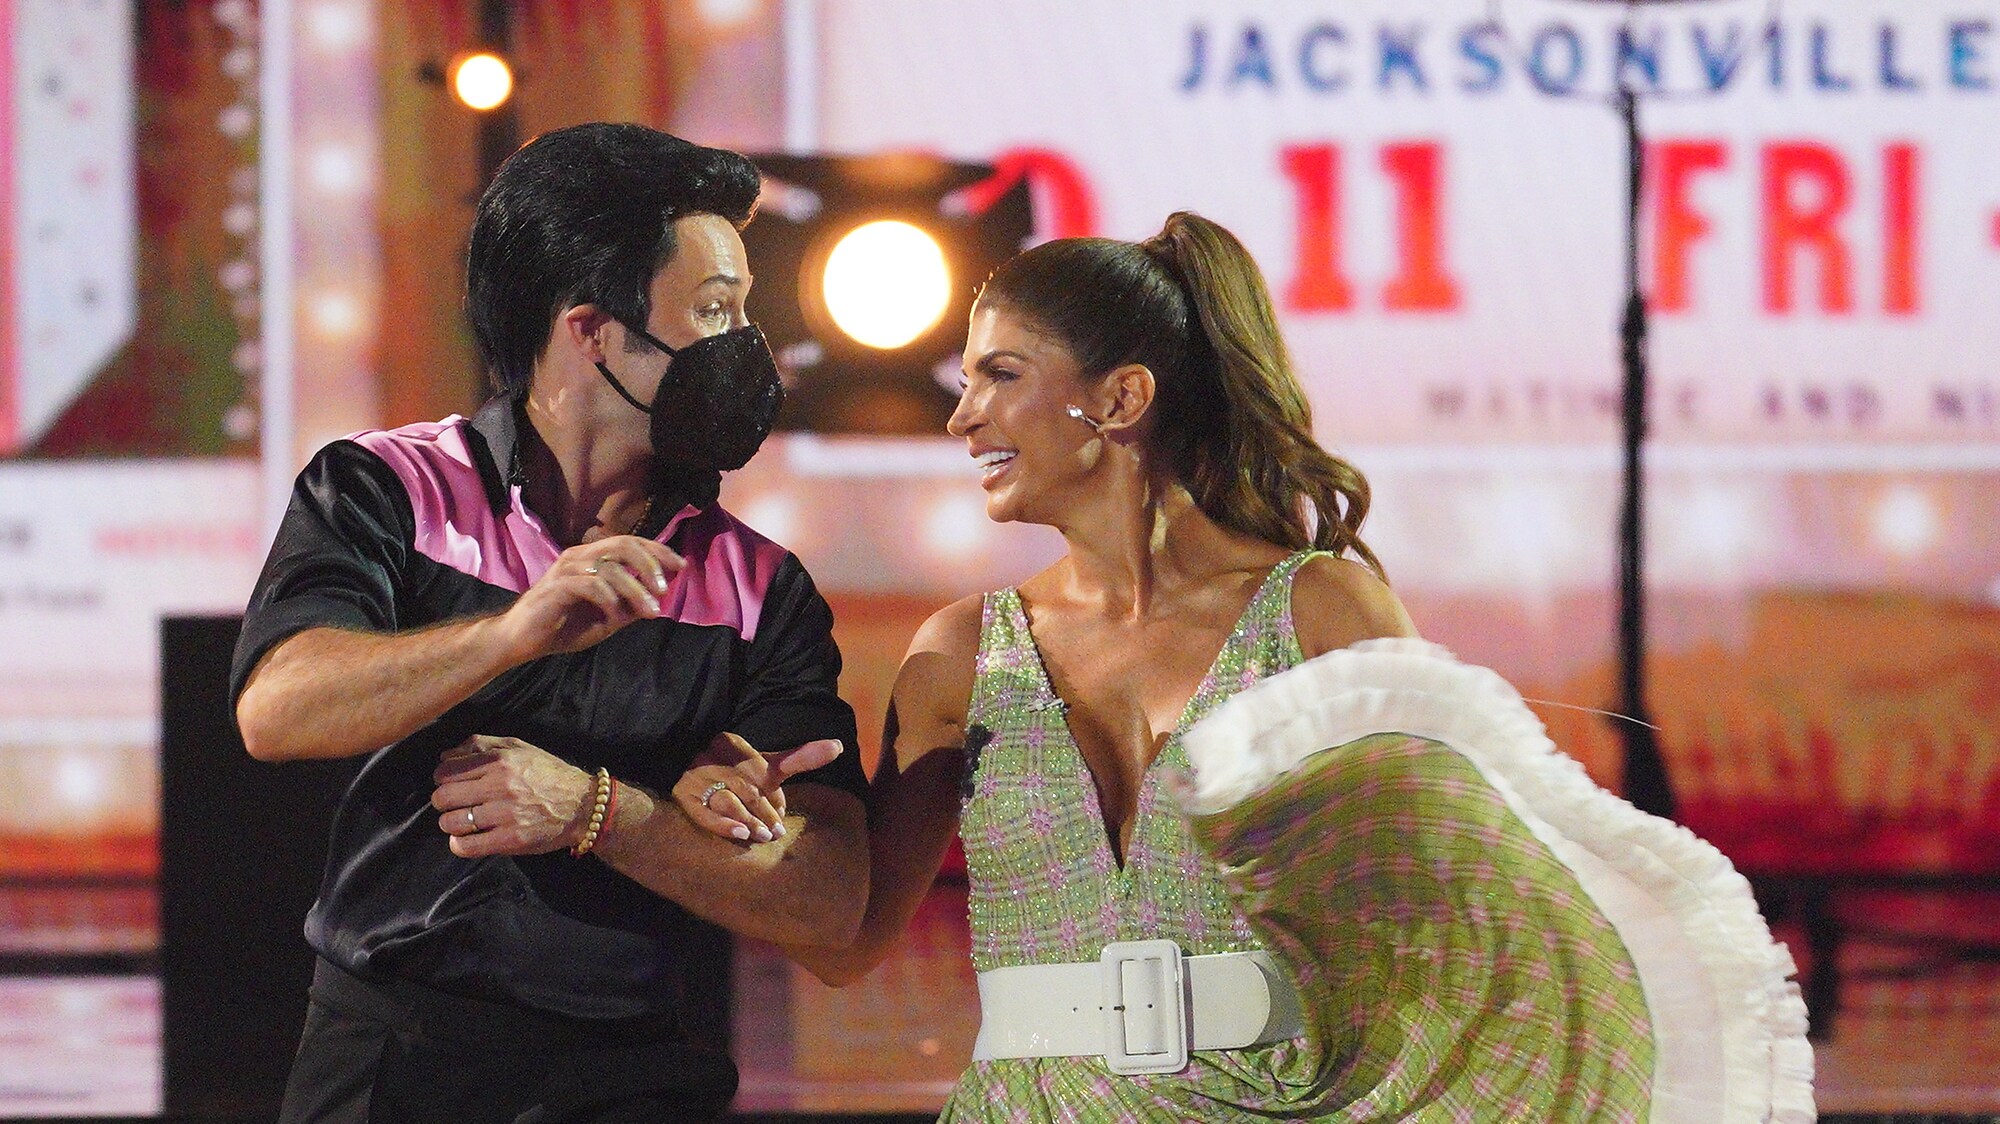 DANCING WITH THE STARS - “Elvis Night” –  The 15 remaining couples “Can’t Help Falling in Love” with Elvis this week as they take on all-new dance styles to music by The King of Rock ‘n’ Roll. Week two of the mirorrball competition will stream live MONDAY, SEPT. 26 (8:00pm ET / 5:00pm PT), on Disney+. (ABC/Christopher Willard) PASHA PASHKOV, TERESA GIUDICE